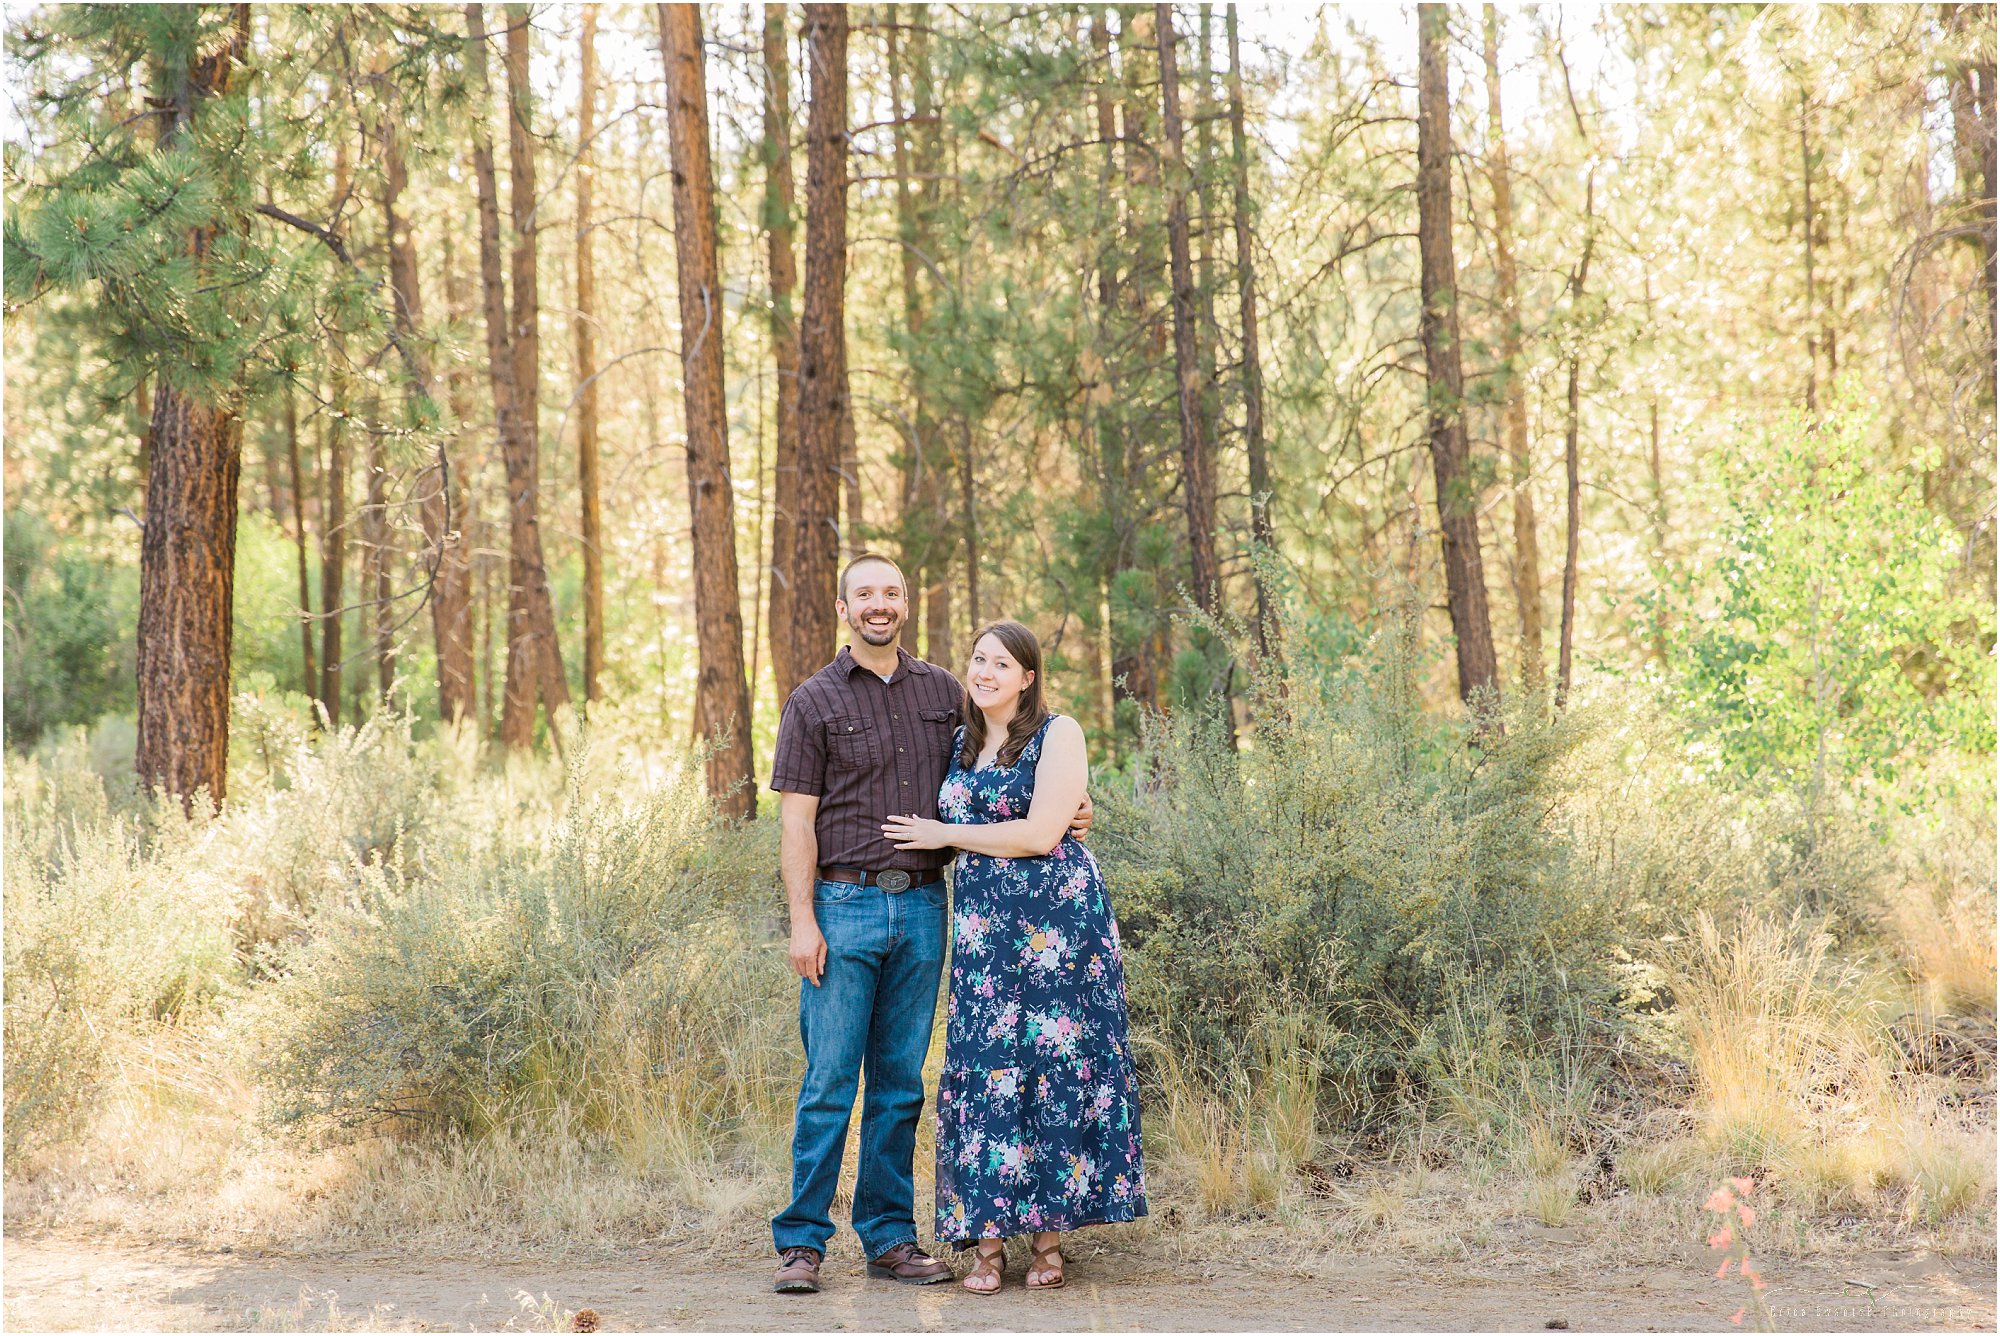 Gorgeous, warm light at this Cascade Mountain engagement photography session at Shevlin Park in Bend, OR. | Erica Swantek Photography